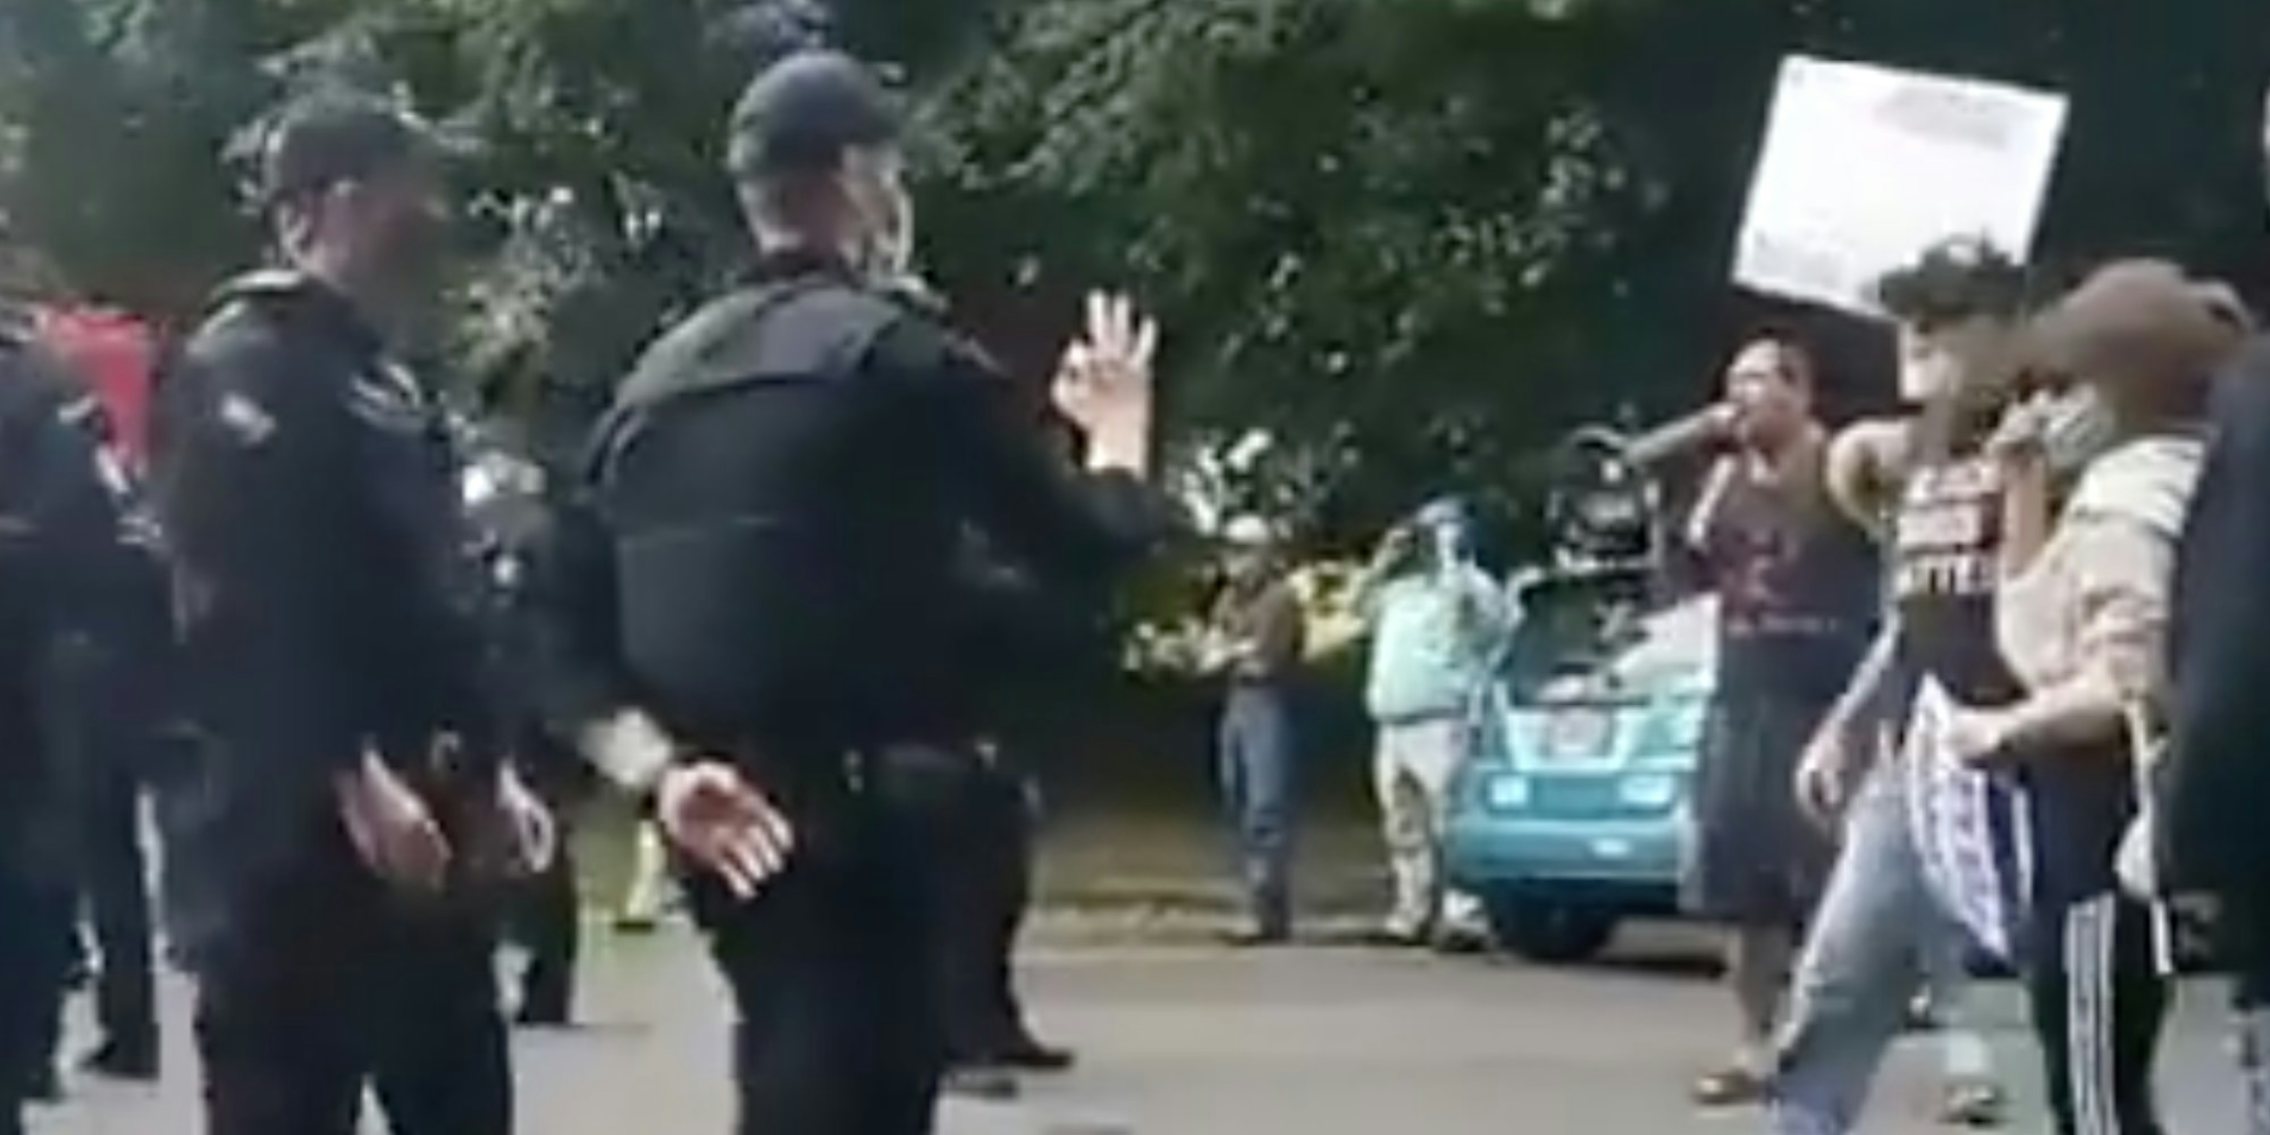 An Oregon police officer using the 'OK' hand signal